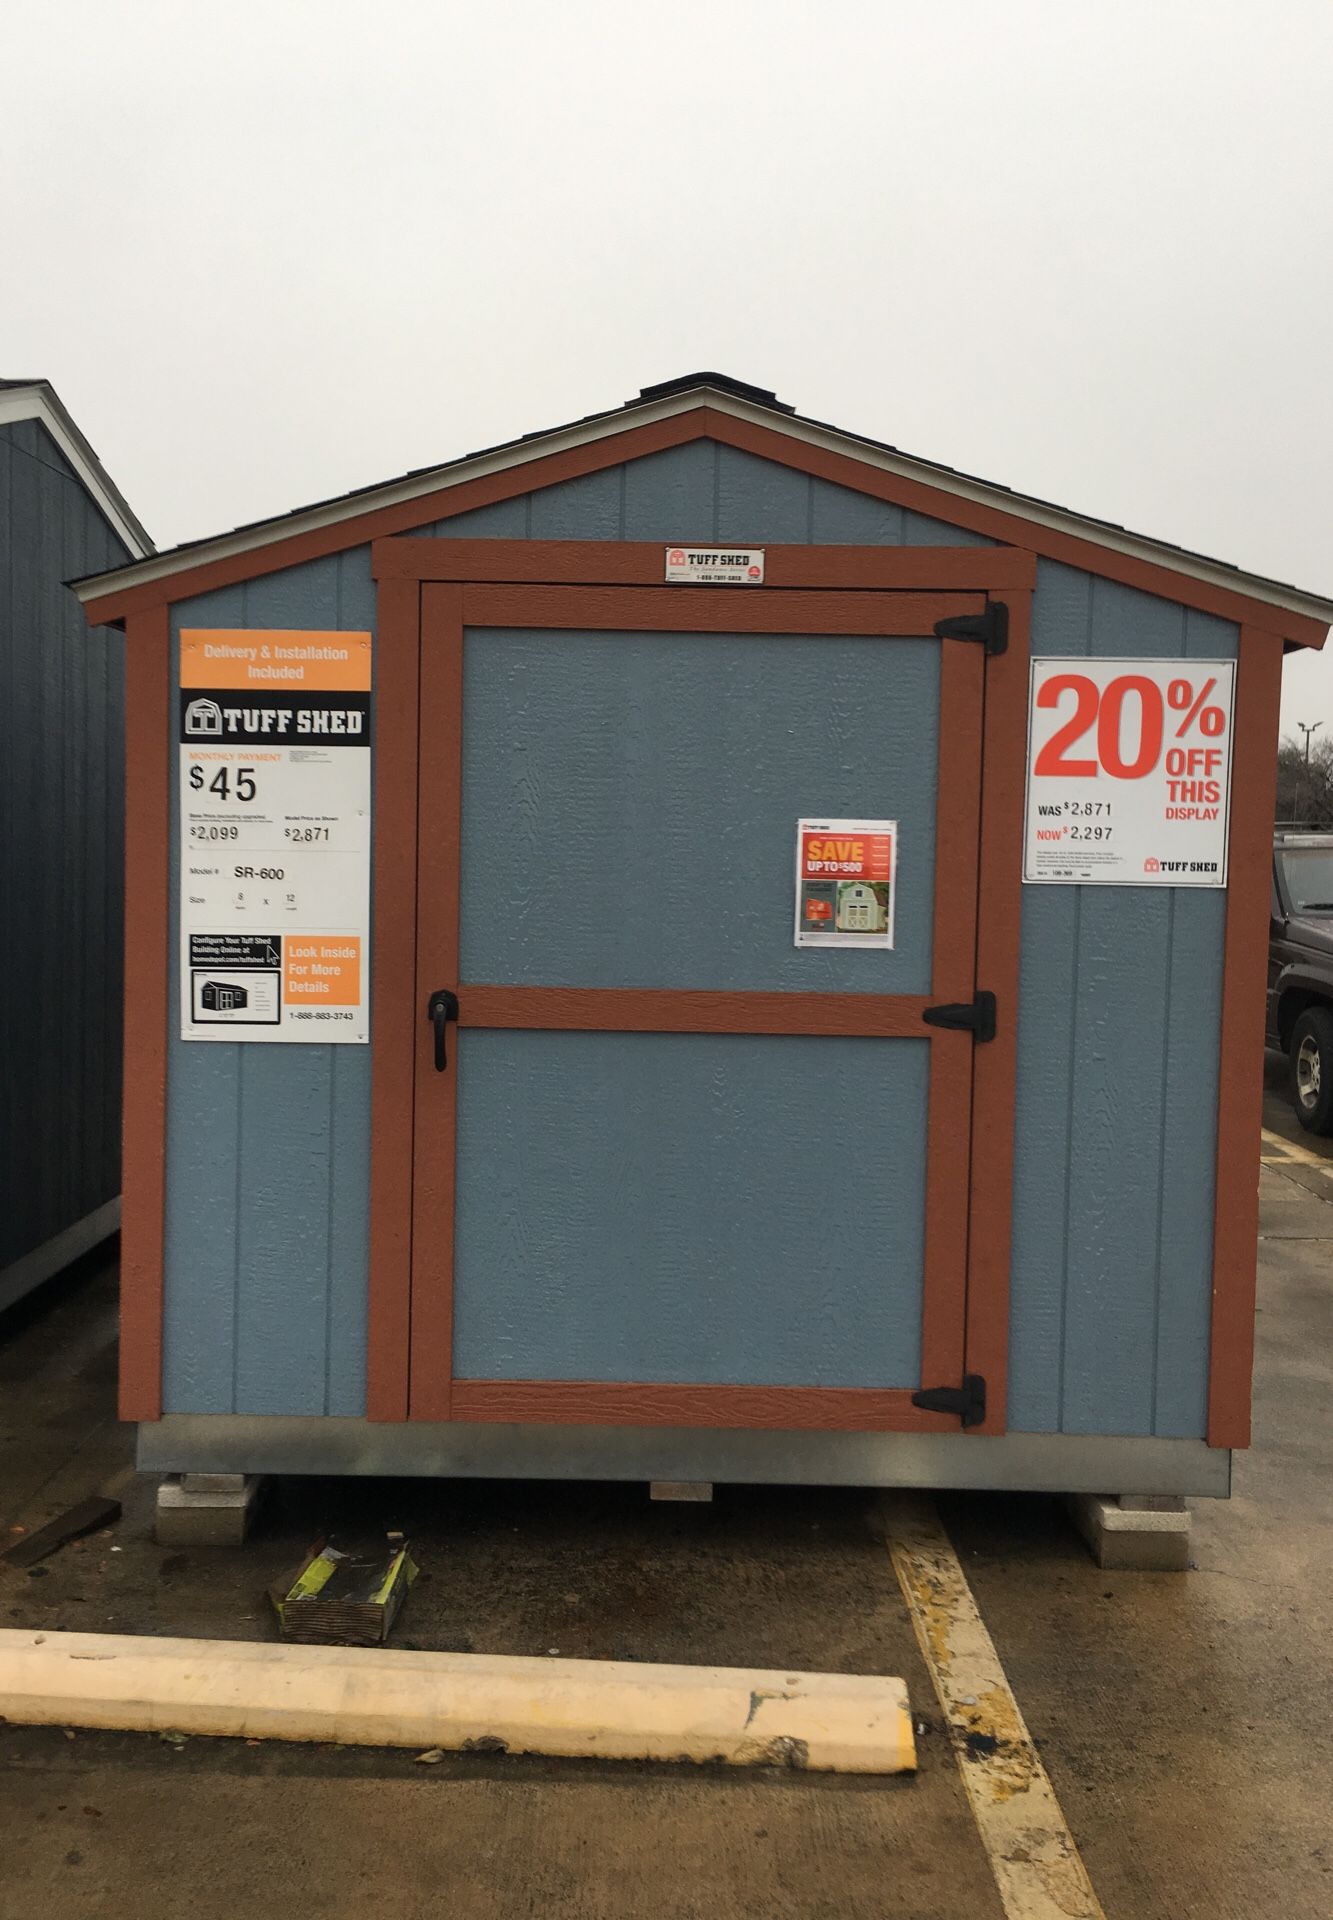 TUFF Shed SR 600 8x12 sold as is with FREE delivery within 30 miles of the Lot on SW Military Dr and Zarzamora